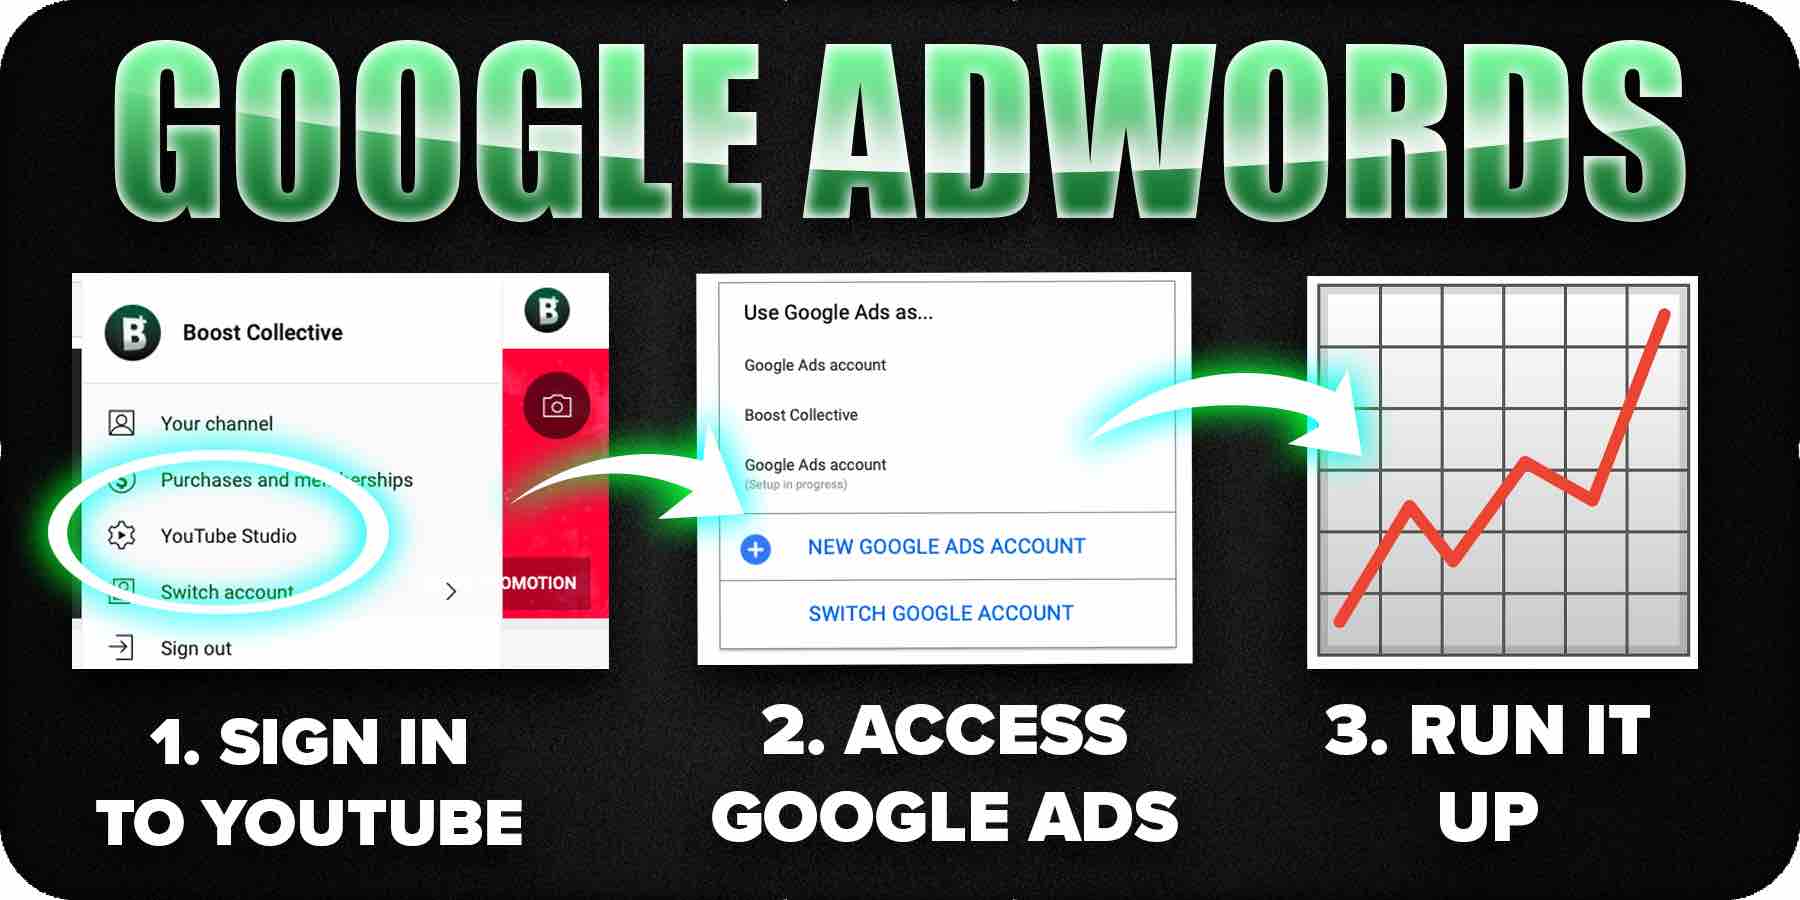 How does Google Adwords work